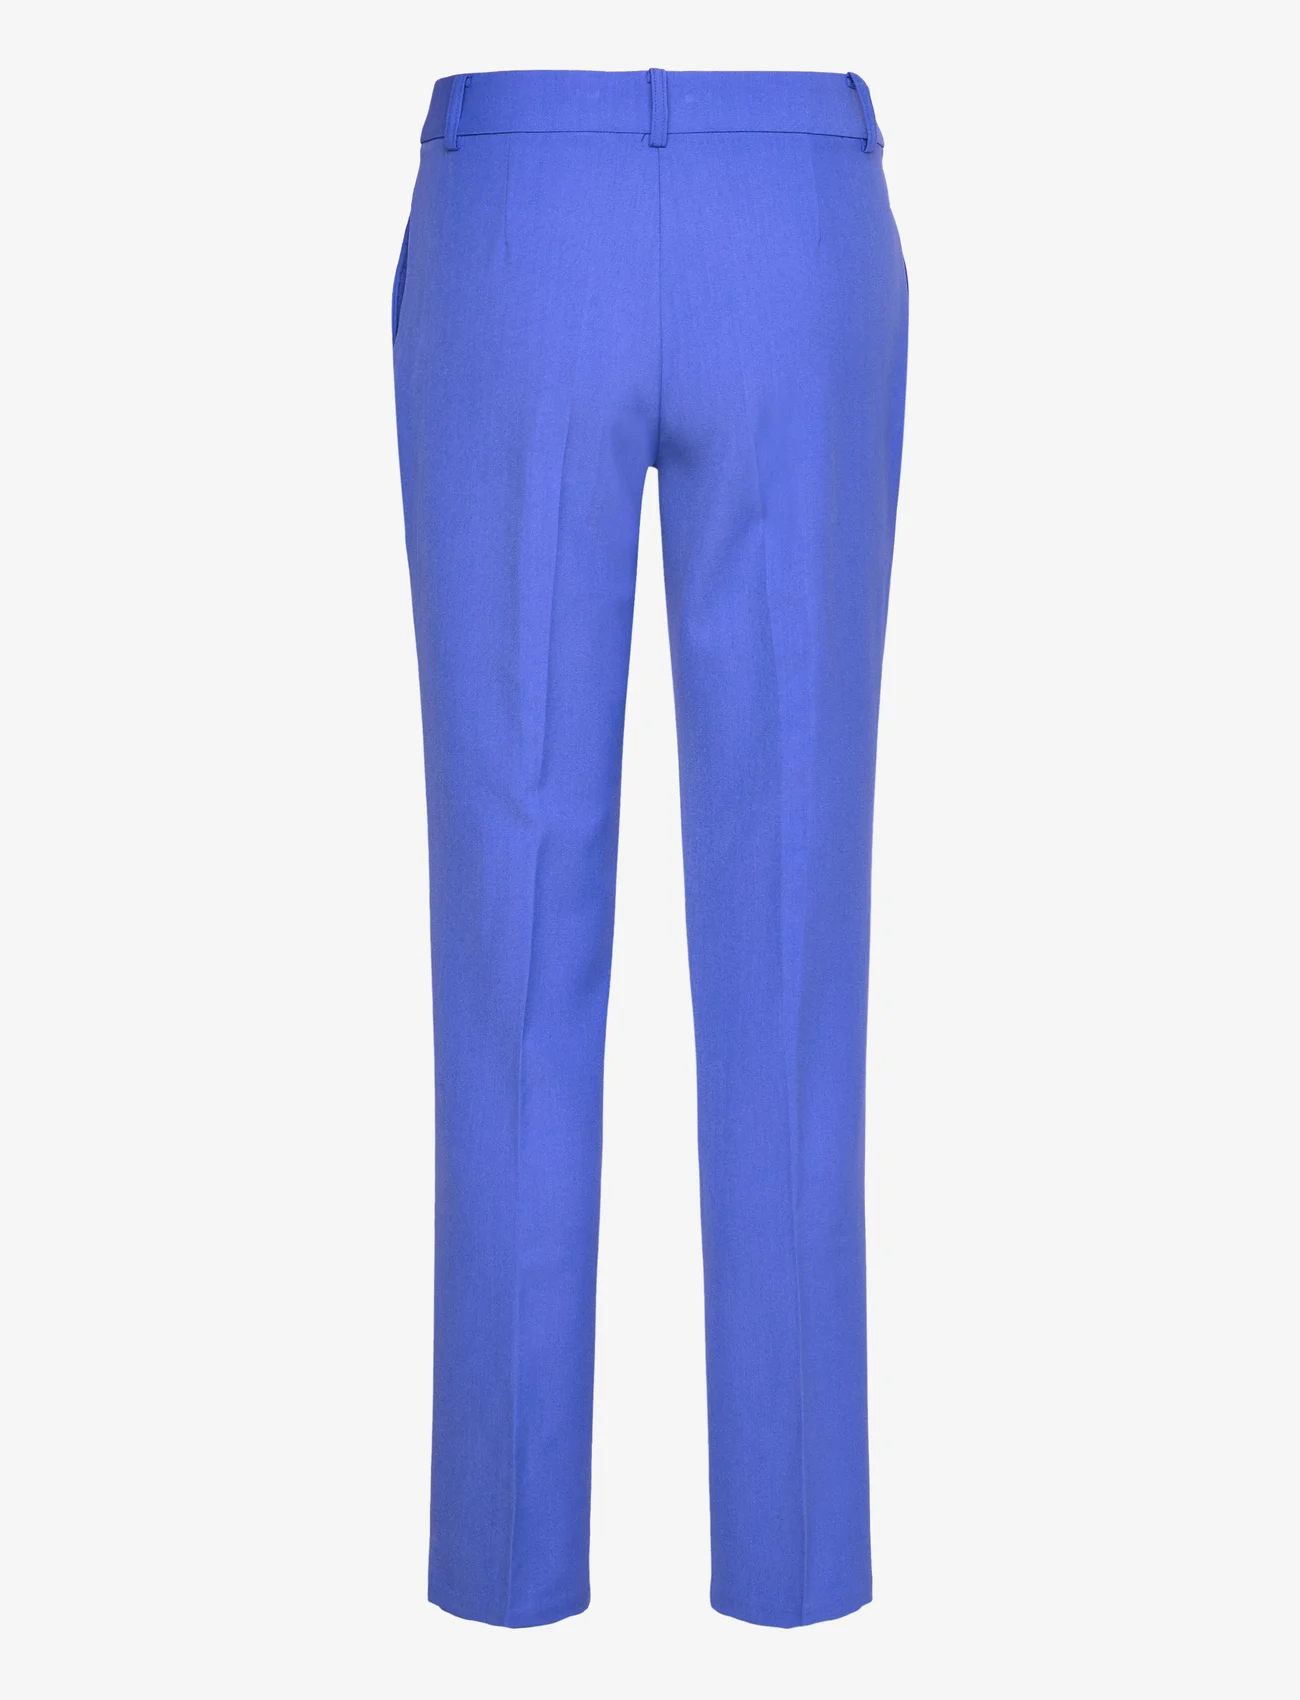 Brandtex - Suiting pants - tailored trousers - clear blue - 1